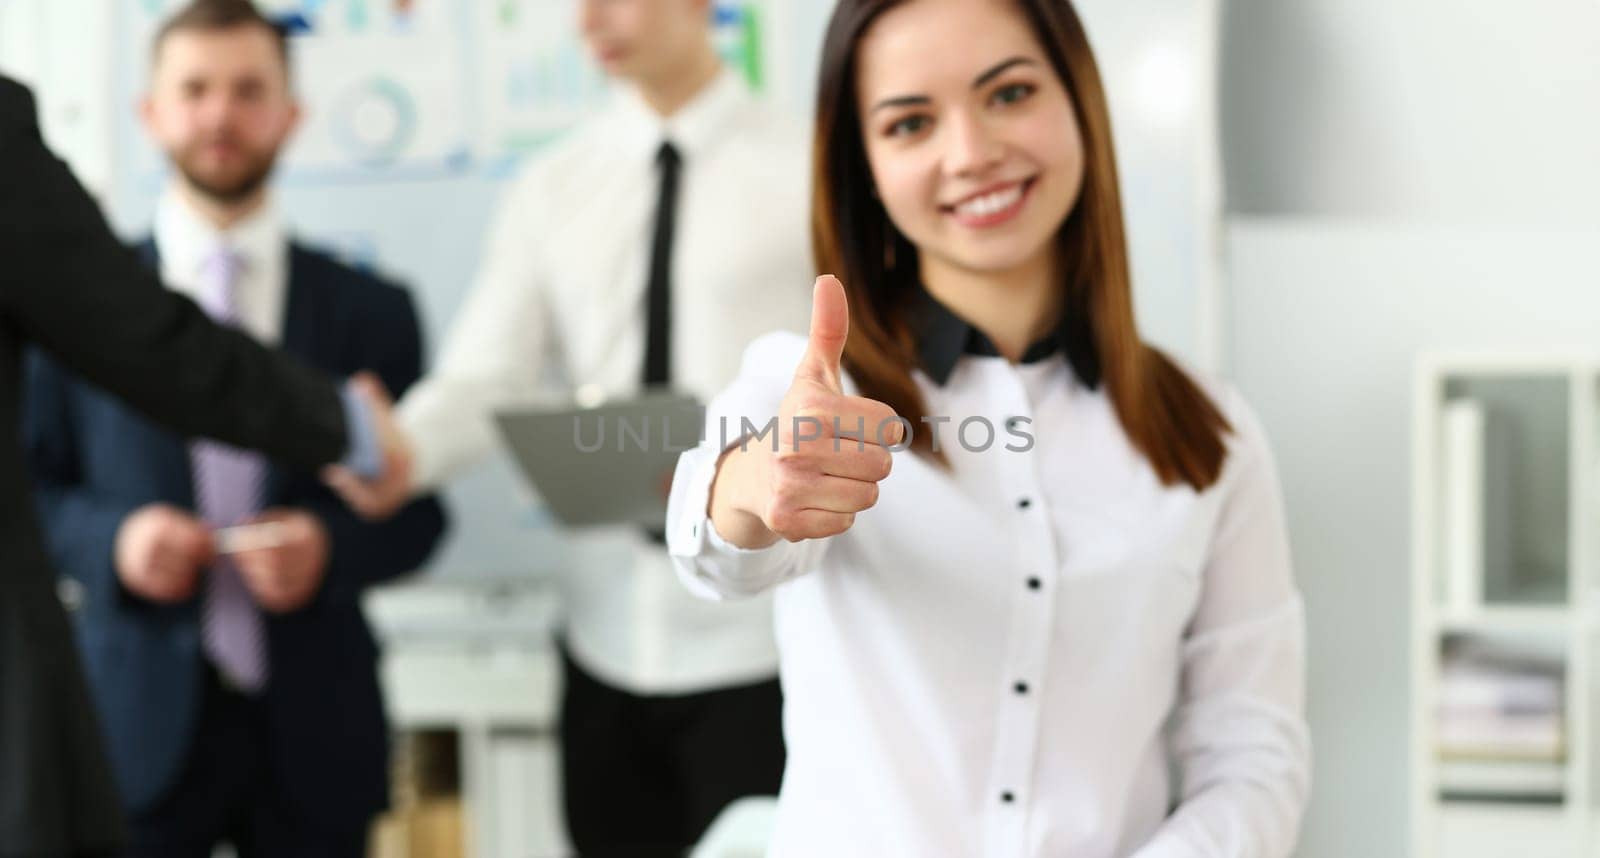 Woman showing confirm symbol during conference in office by kuprevich